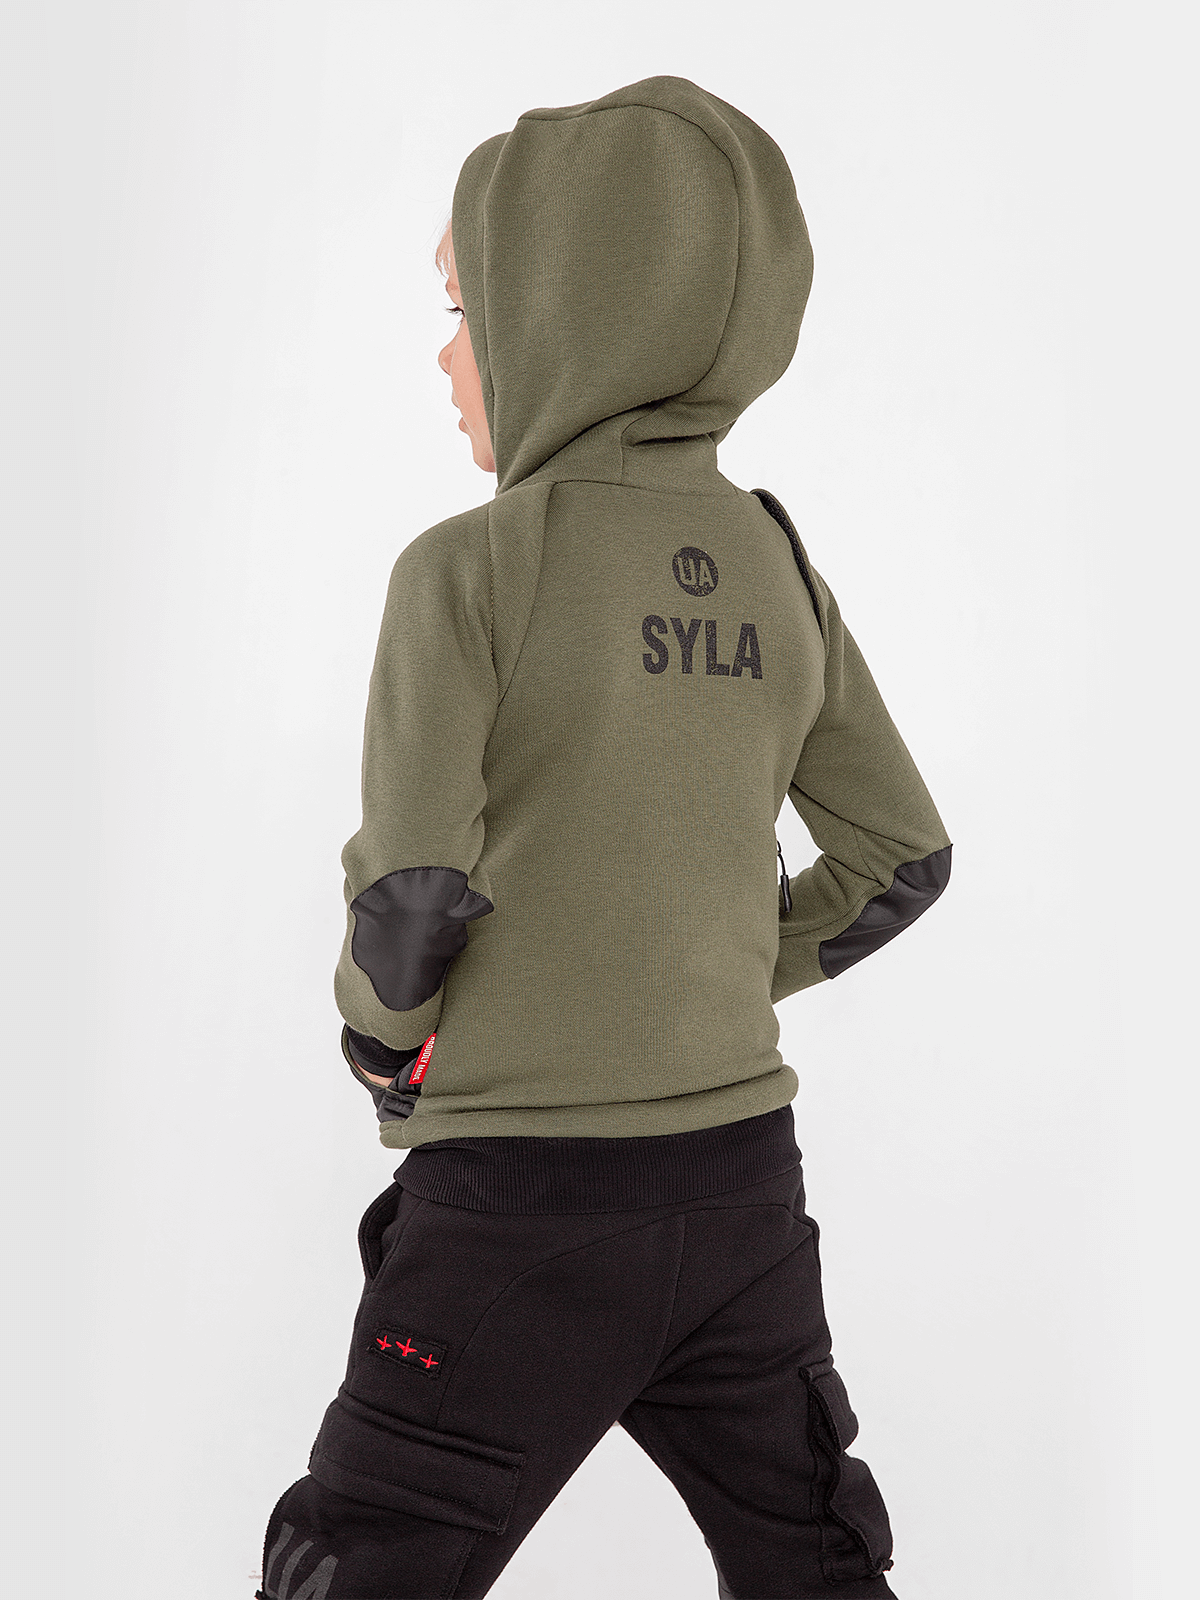 Kids Hoodie Syla. Color khaki.  Well suited for both boys and girls.